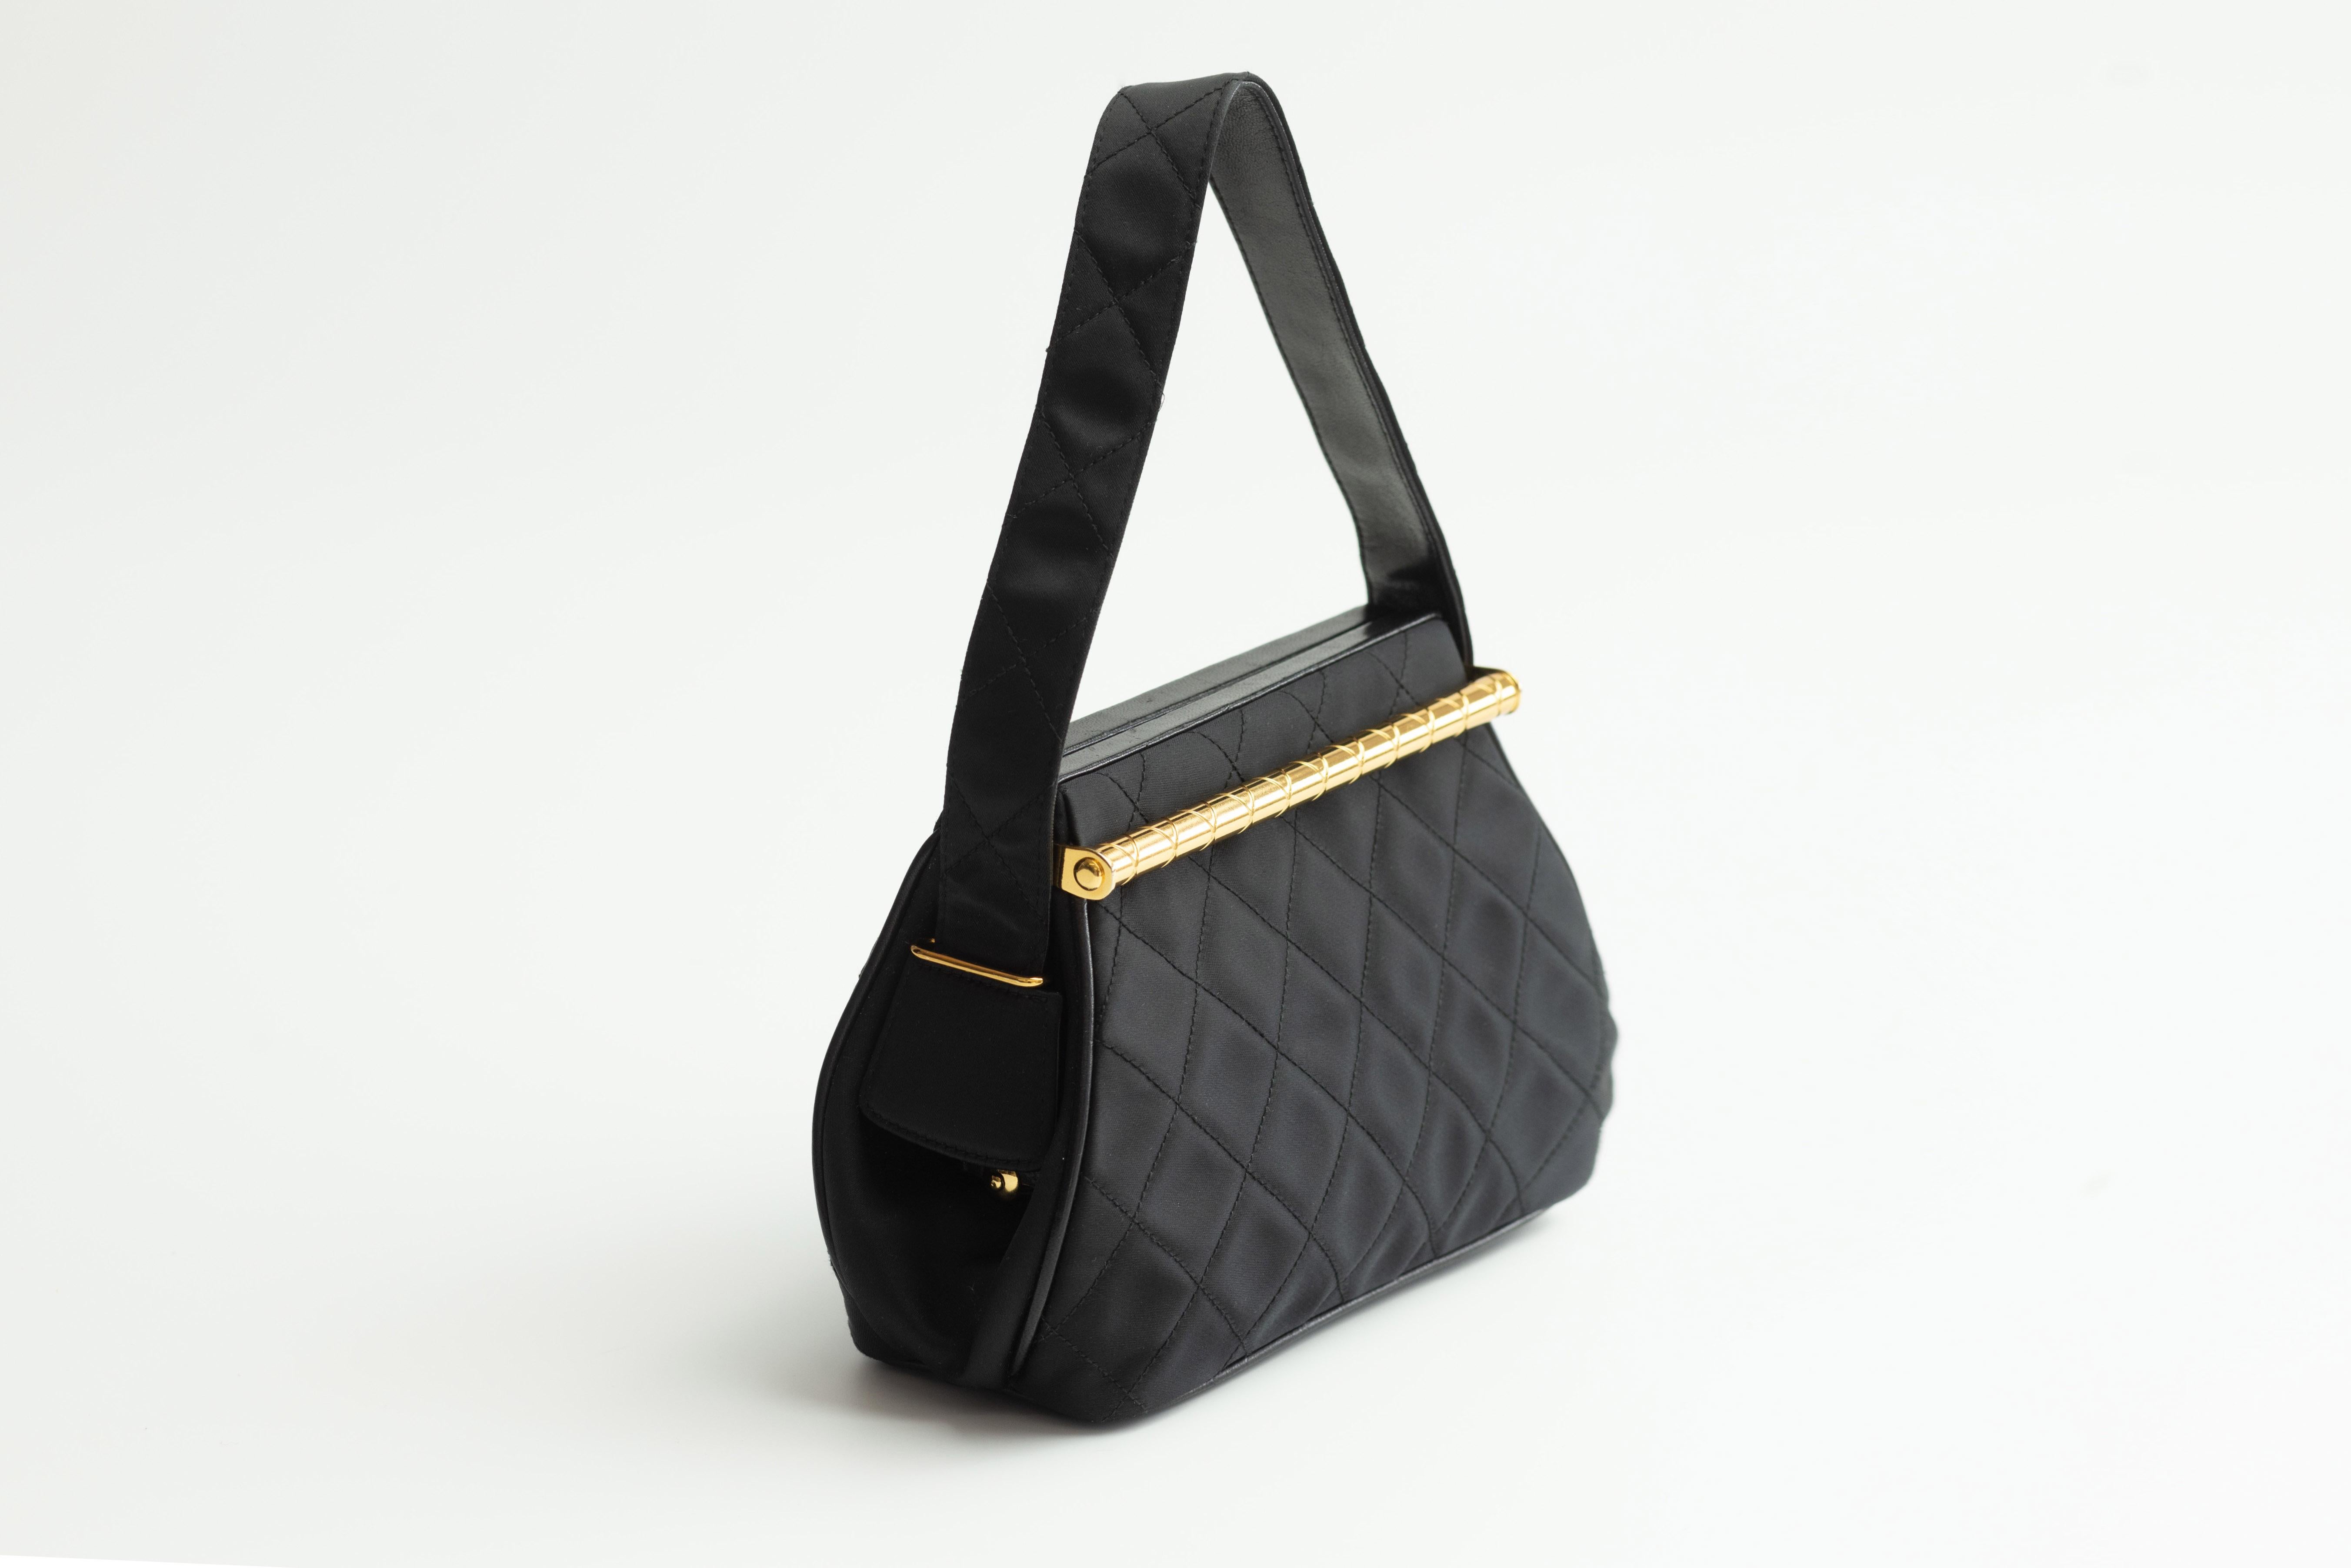 Chanel Black Satin Classic One Handbag In Good Condition For Sale In Montreal, Quebec